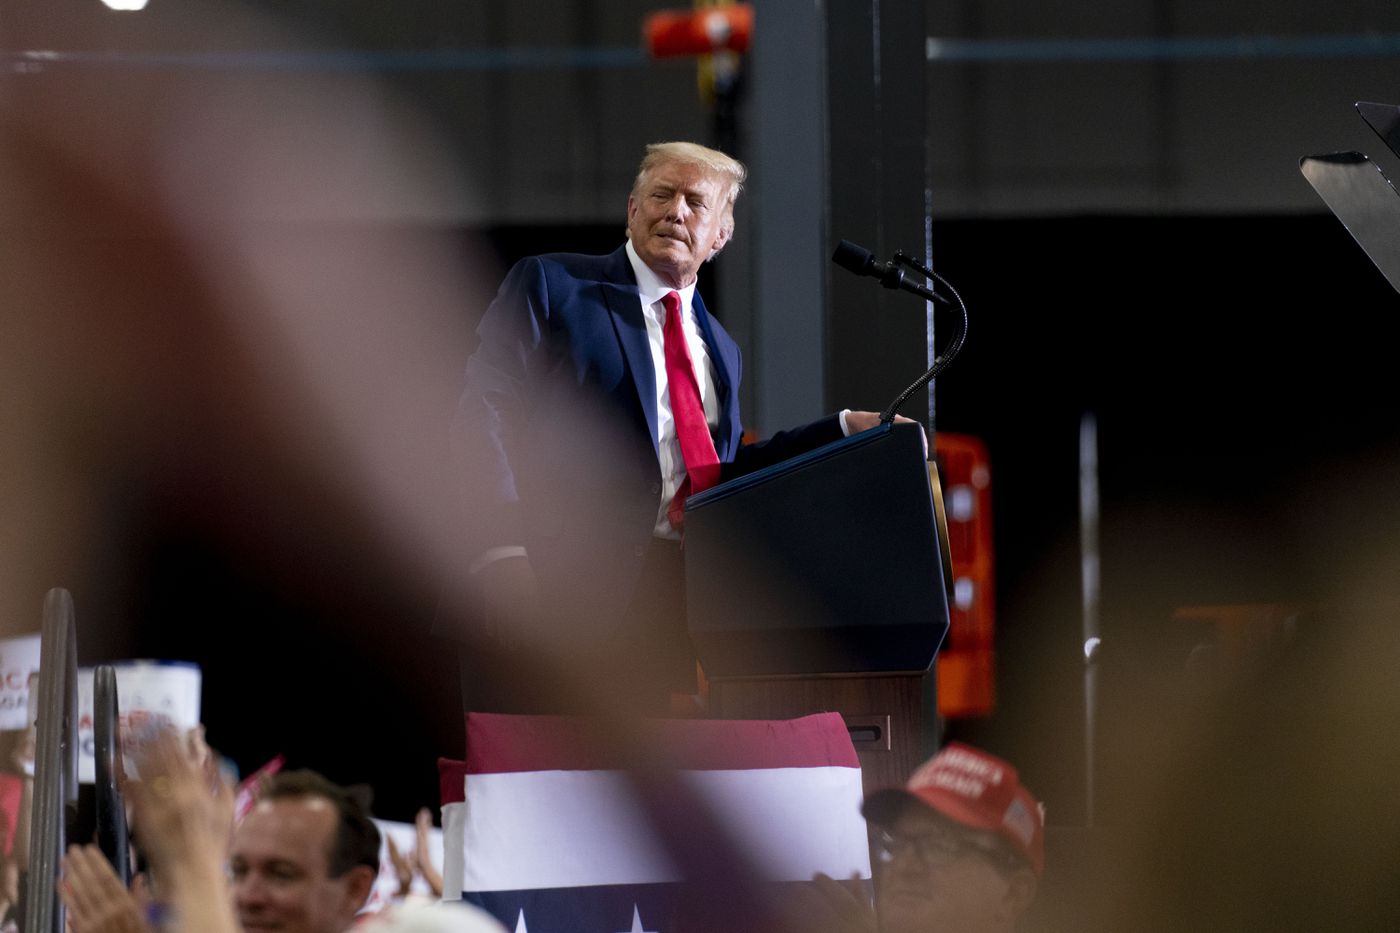 President Donald Trump pauses while speaking at a rally at Xtreme Manufacturing, Sunday, Sept. 13, 2020, in Henderson, Nev.